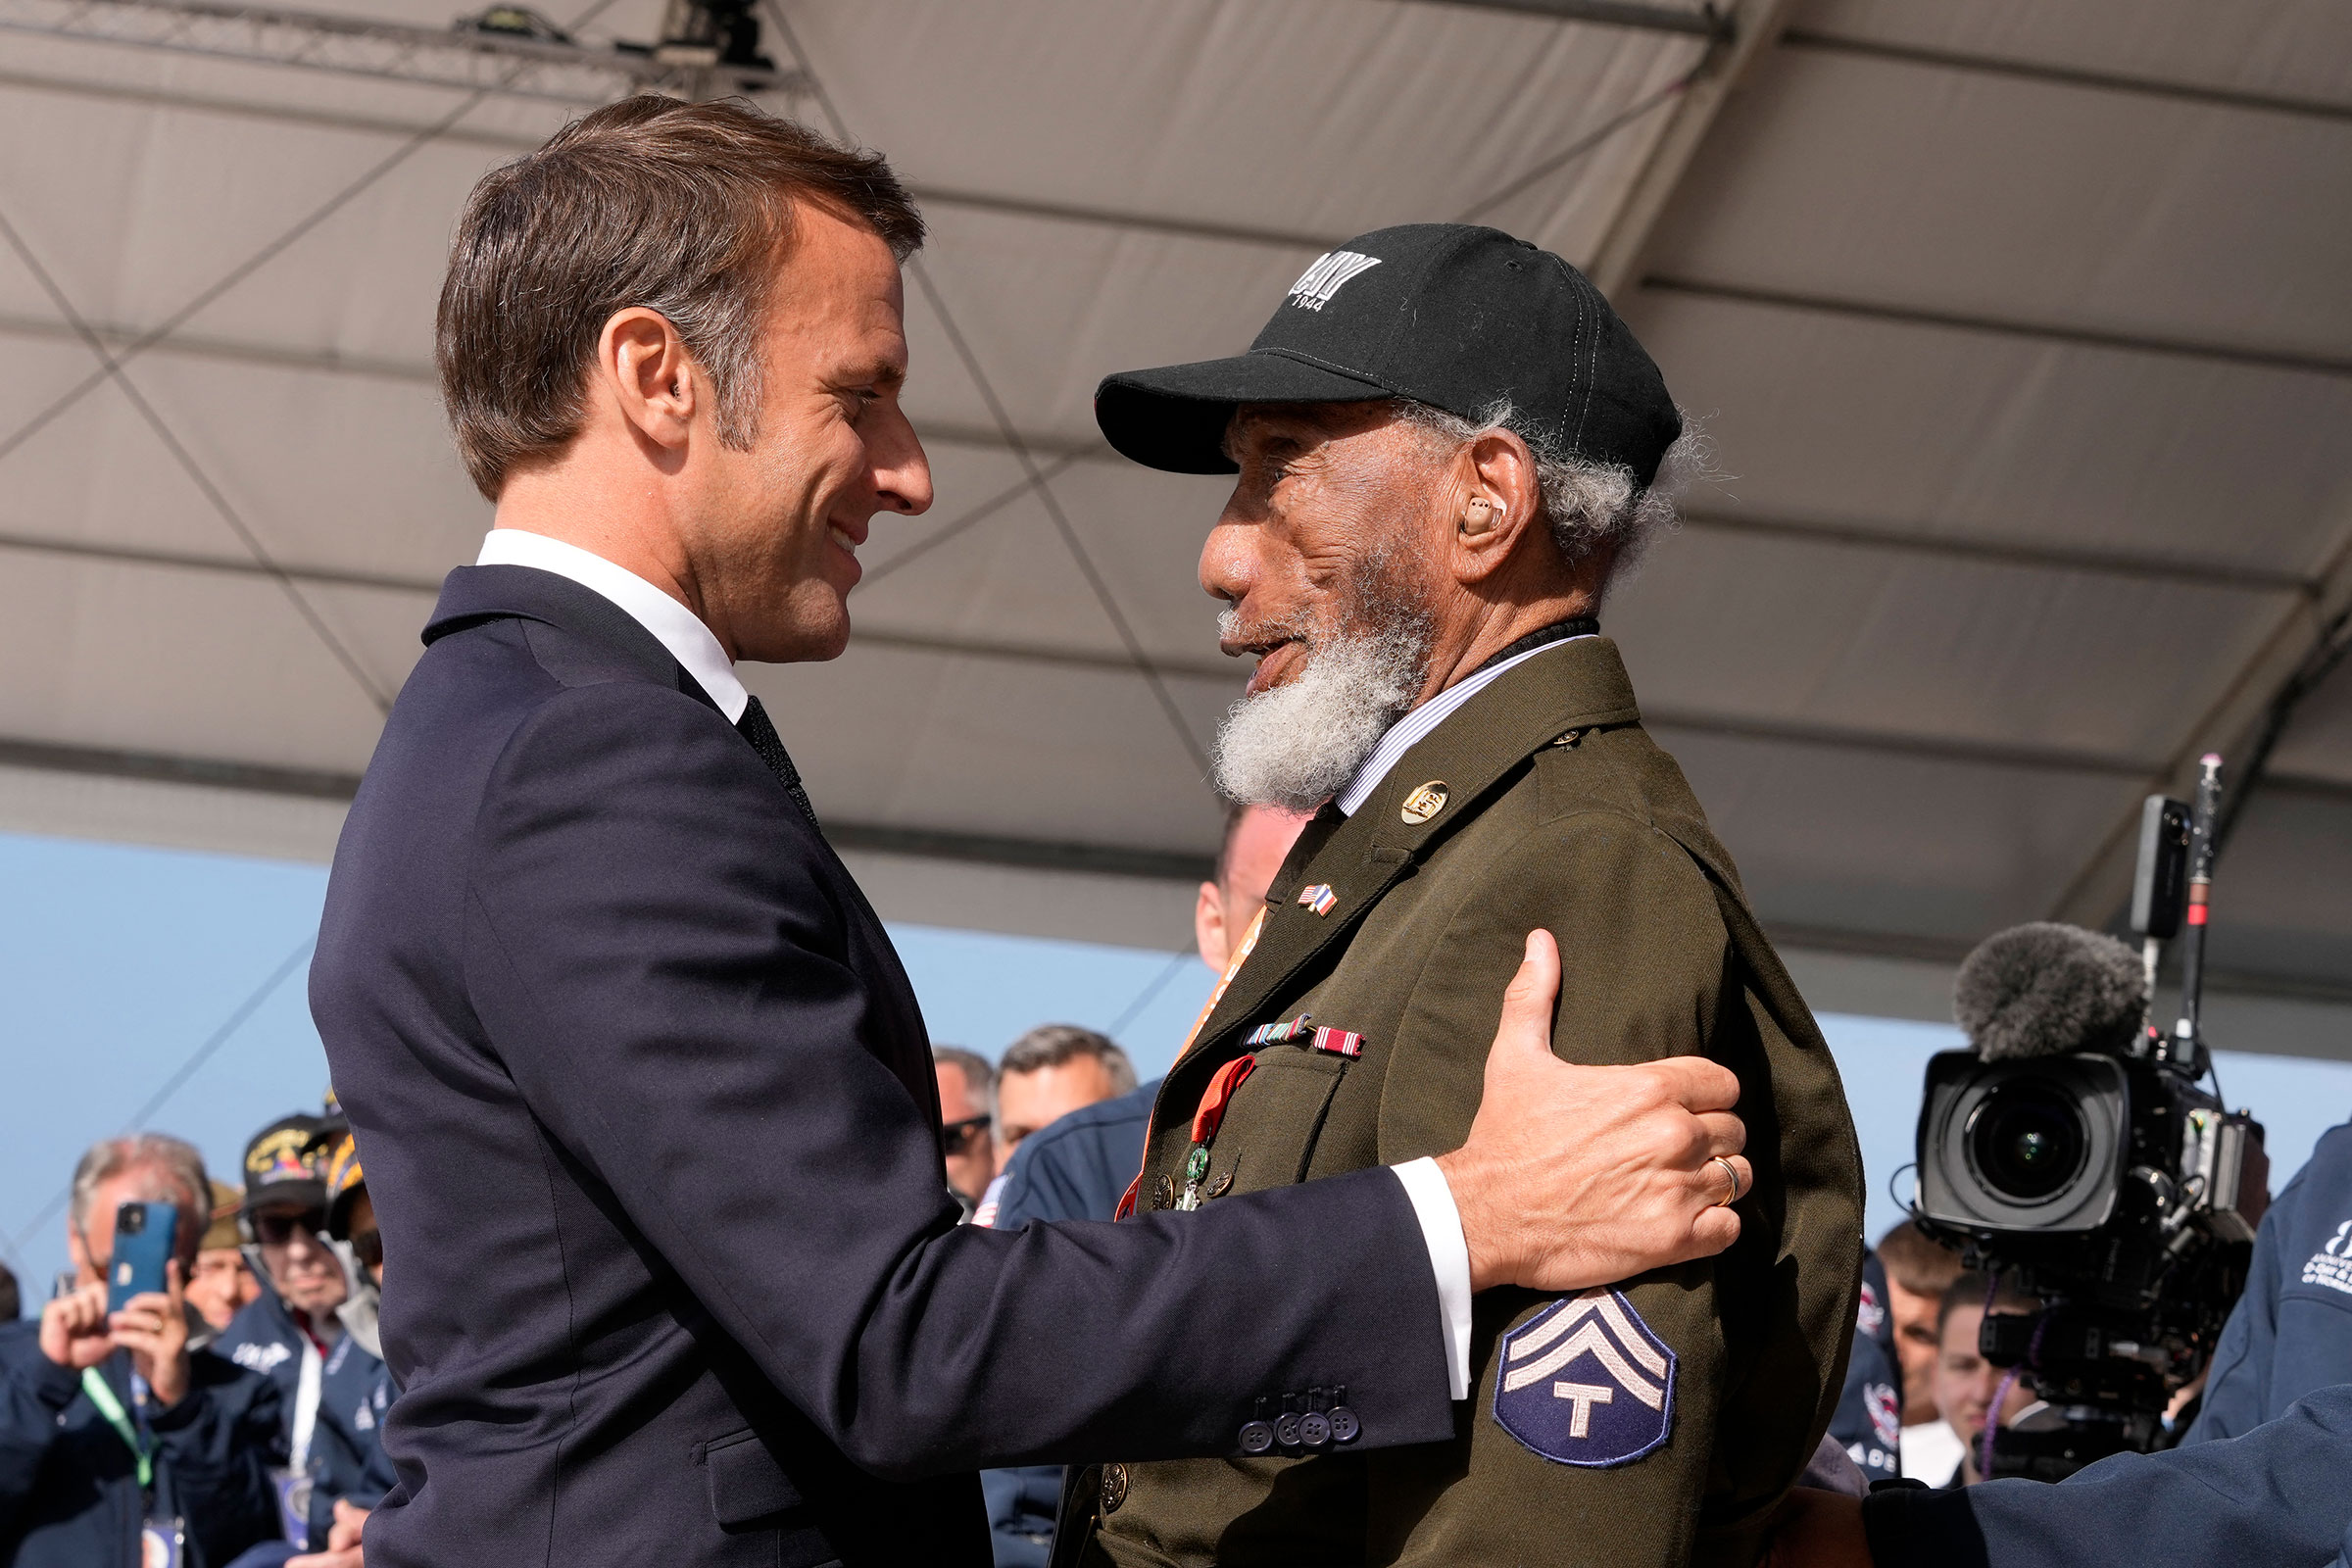 French President Emmanuel Macron awards US WWII veteran Arlester Brown with the Legion of Honor during the International commemorative ceremony at Omaha Beach marking the 80th anniversary of the World War II "D-Day" Allied landings in Normandy, in Saint-Laurent-sur-Mer, in northwestern France, on June 6.